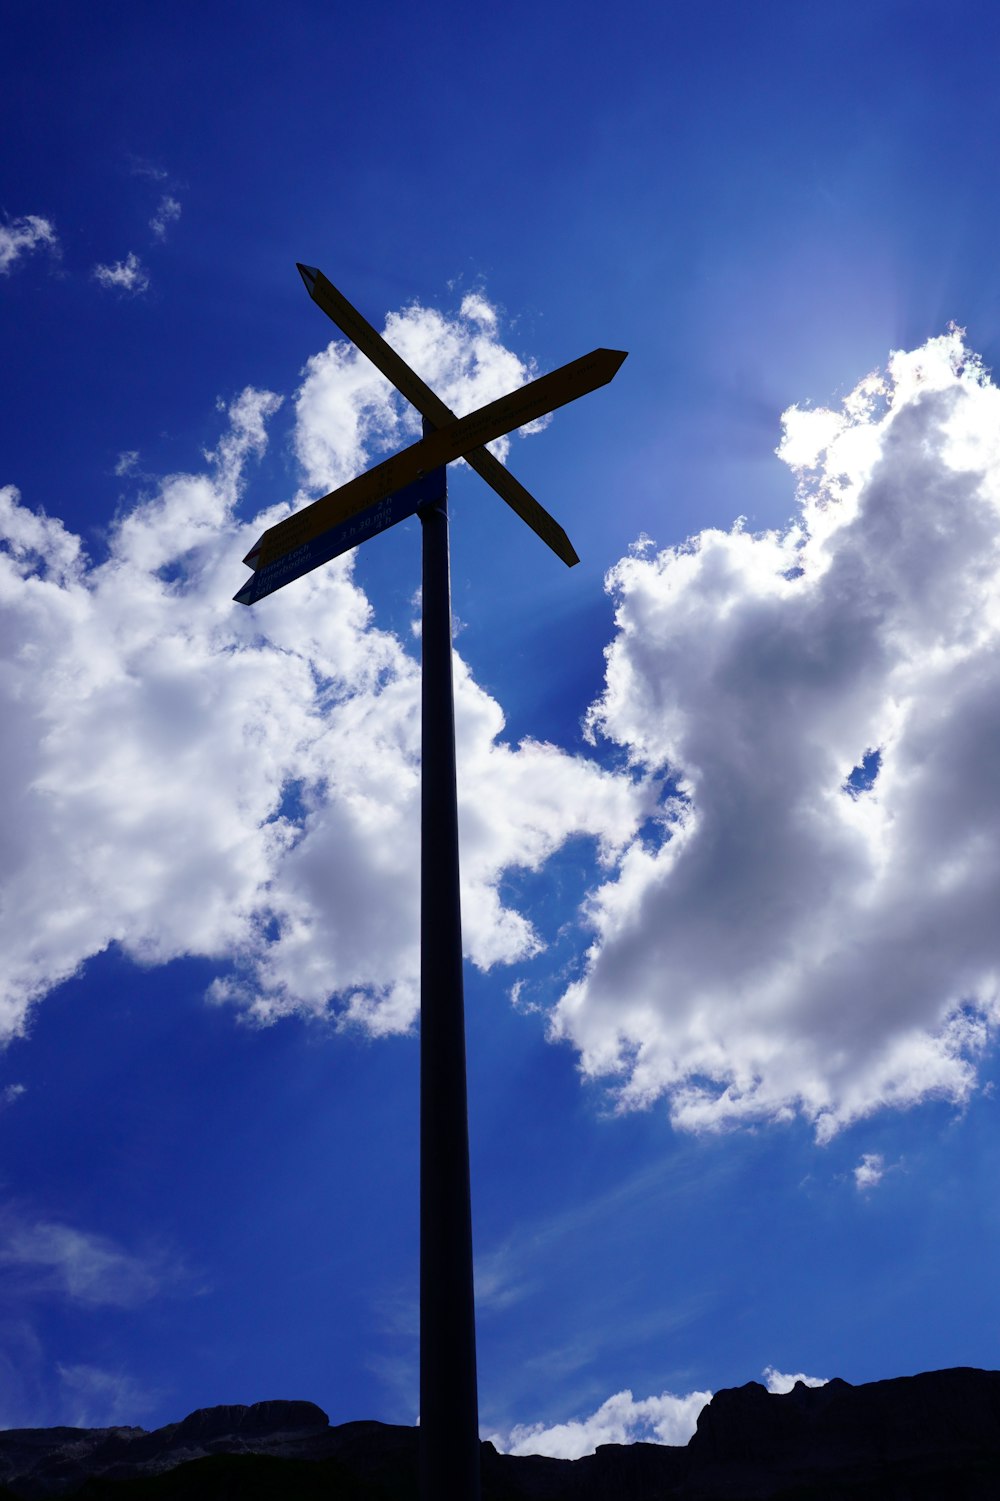 a cross is silhouetted against a partly cloudy sky